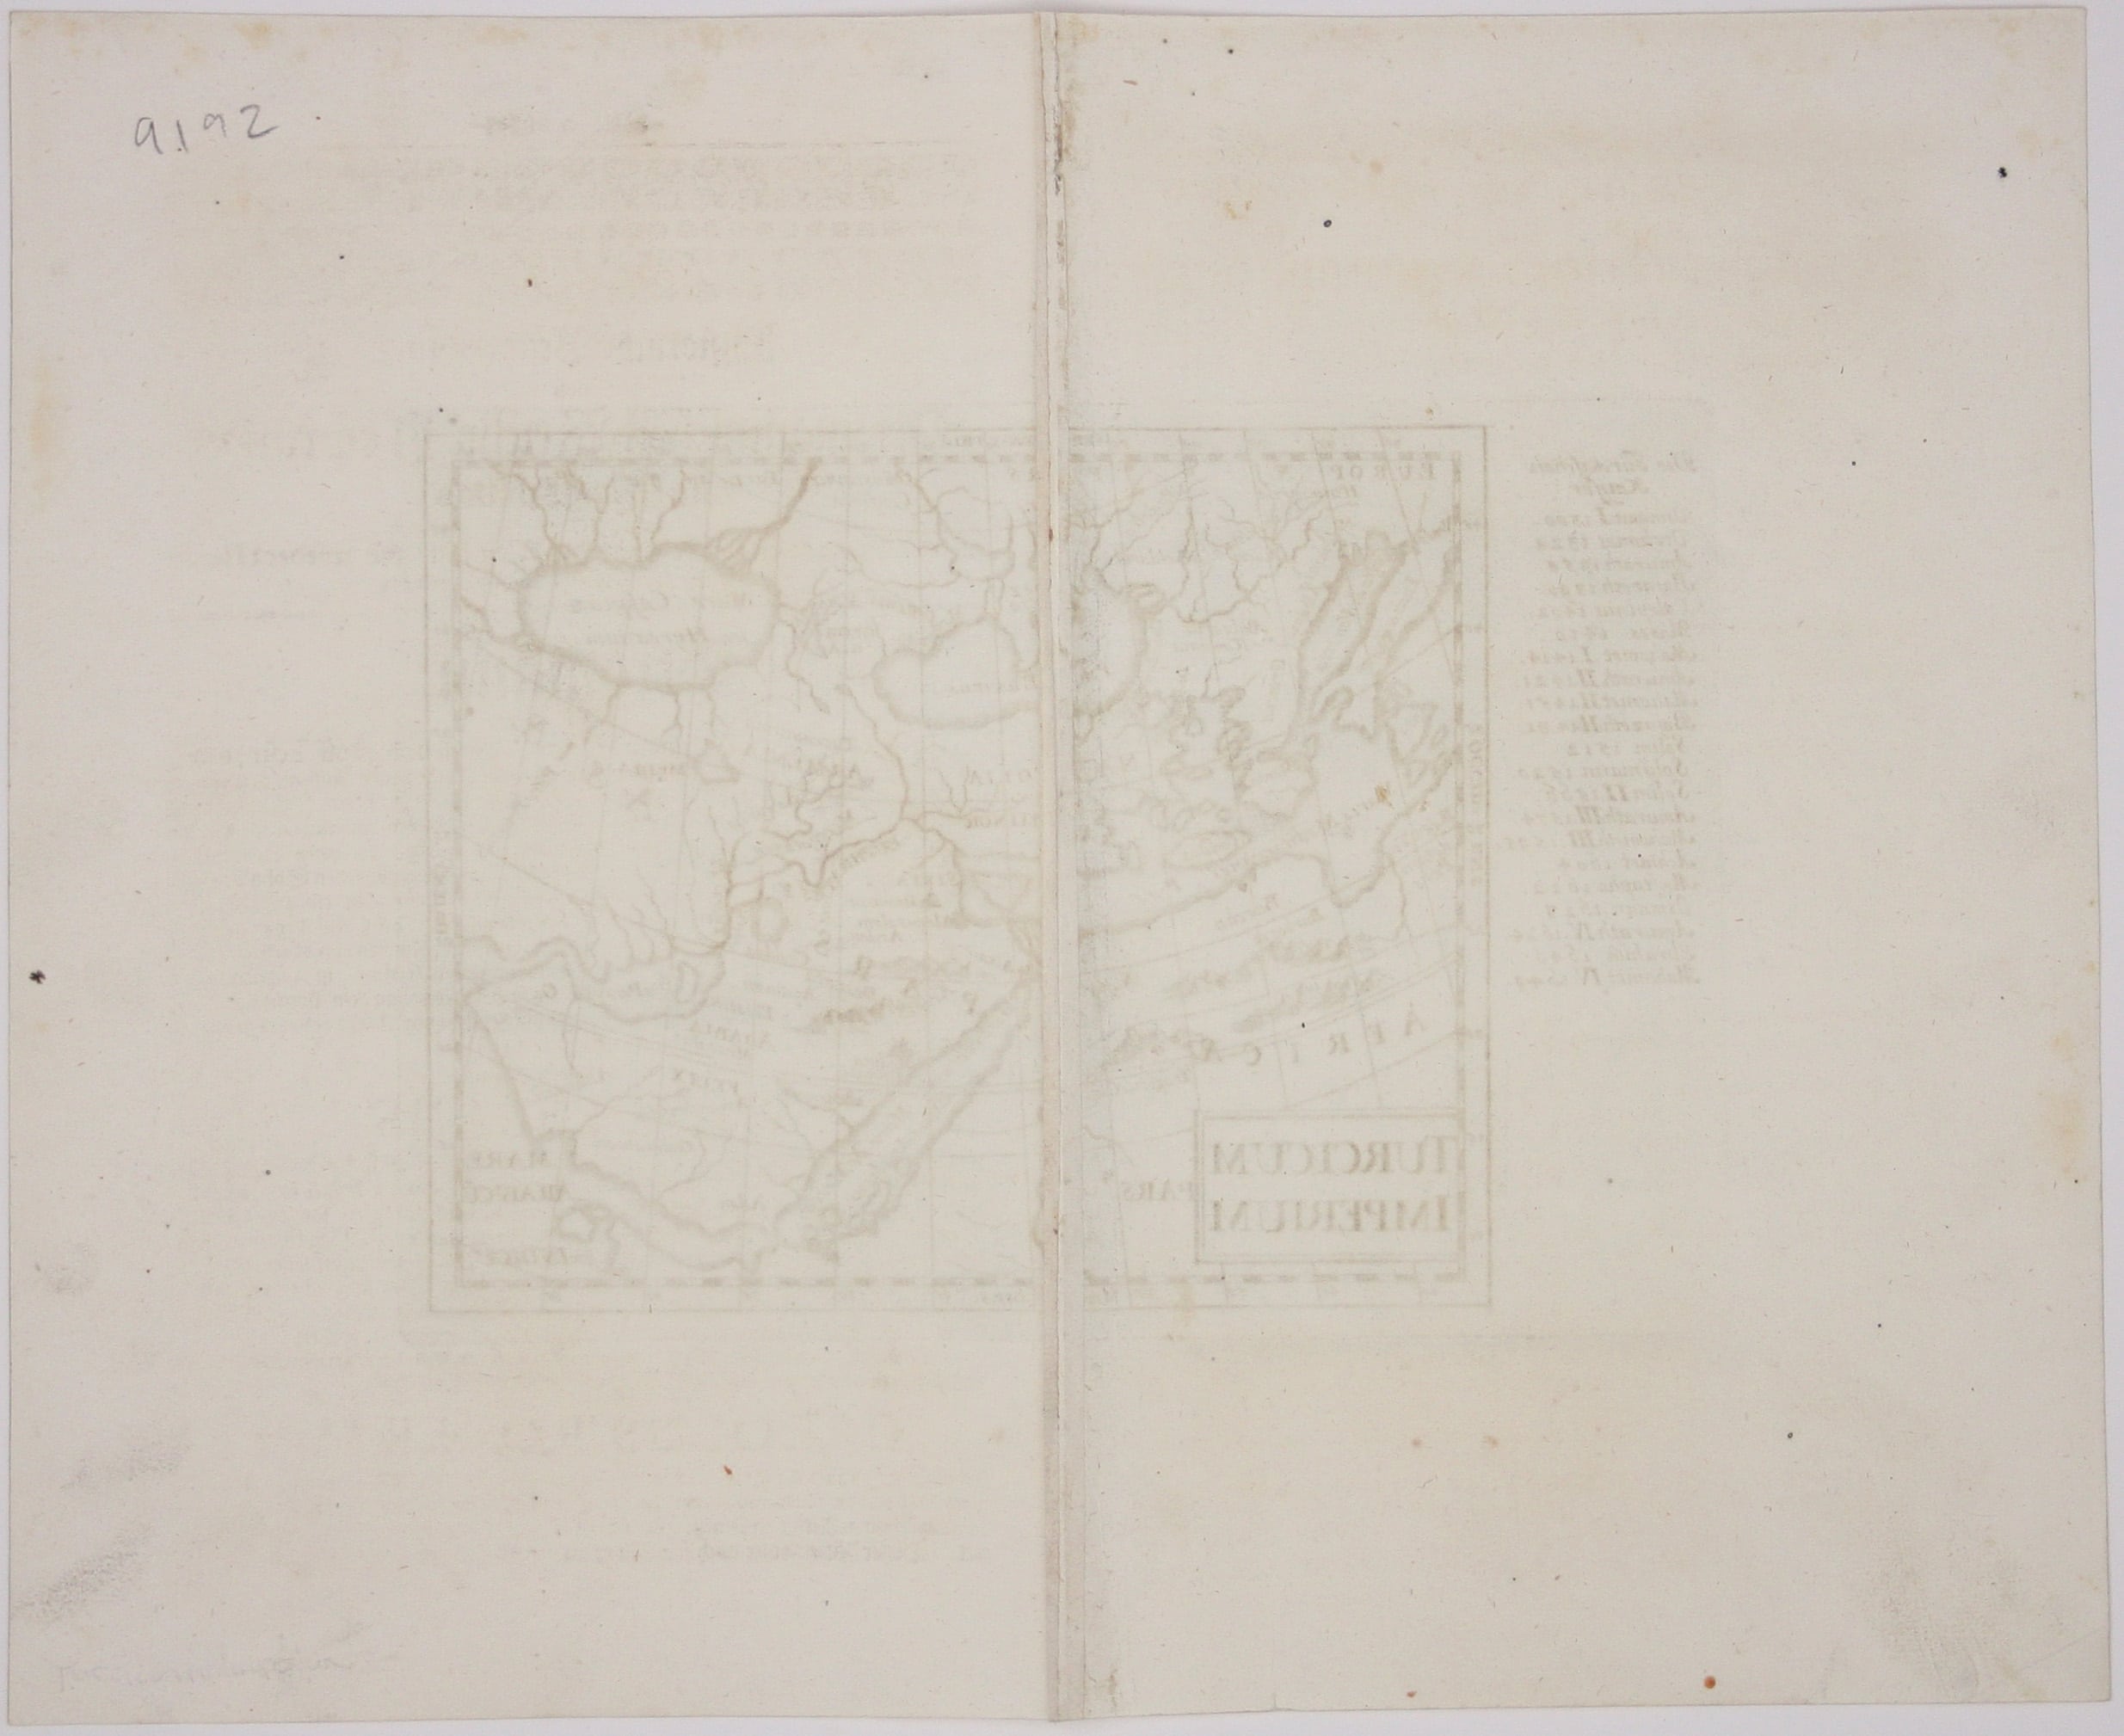 Wagner’s Map of the Ottoman Empire